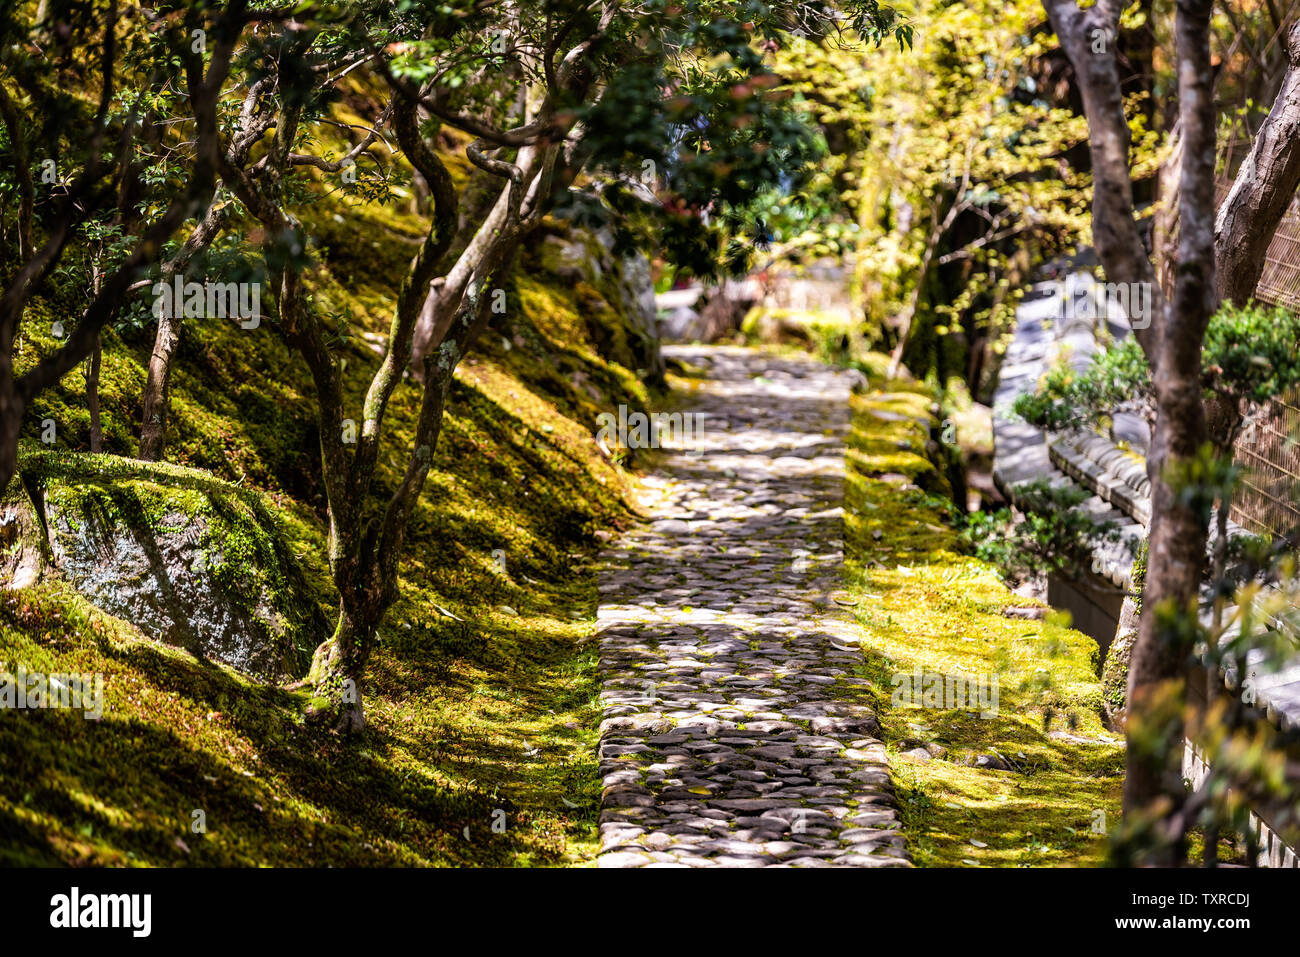 Nara, Japan traditional garden during spring with old stone path road closeup in Japanese style Stock Photo